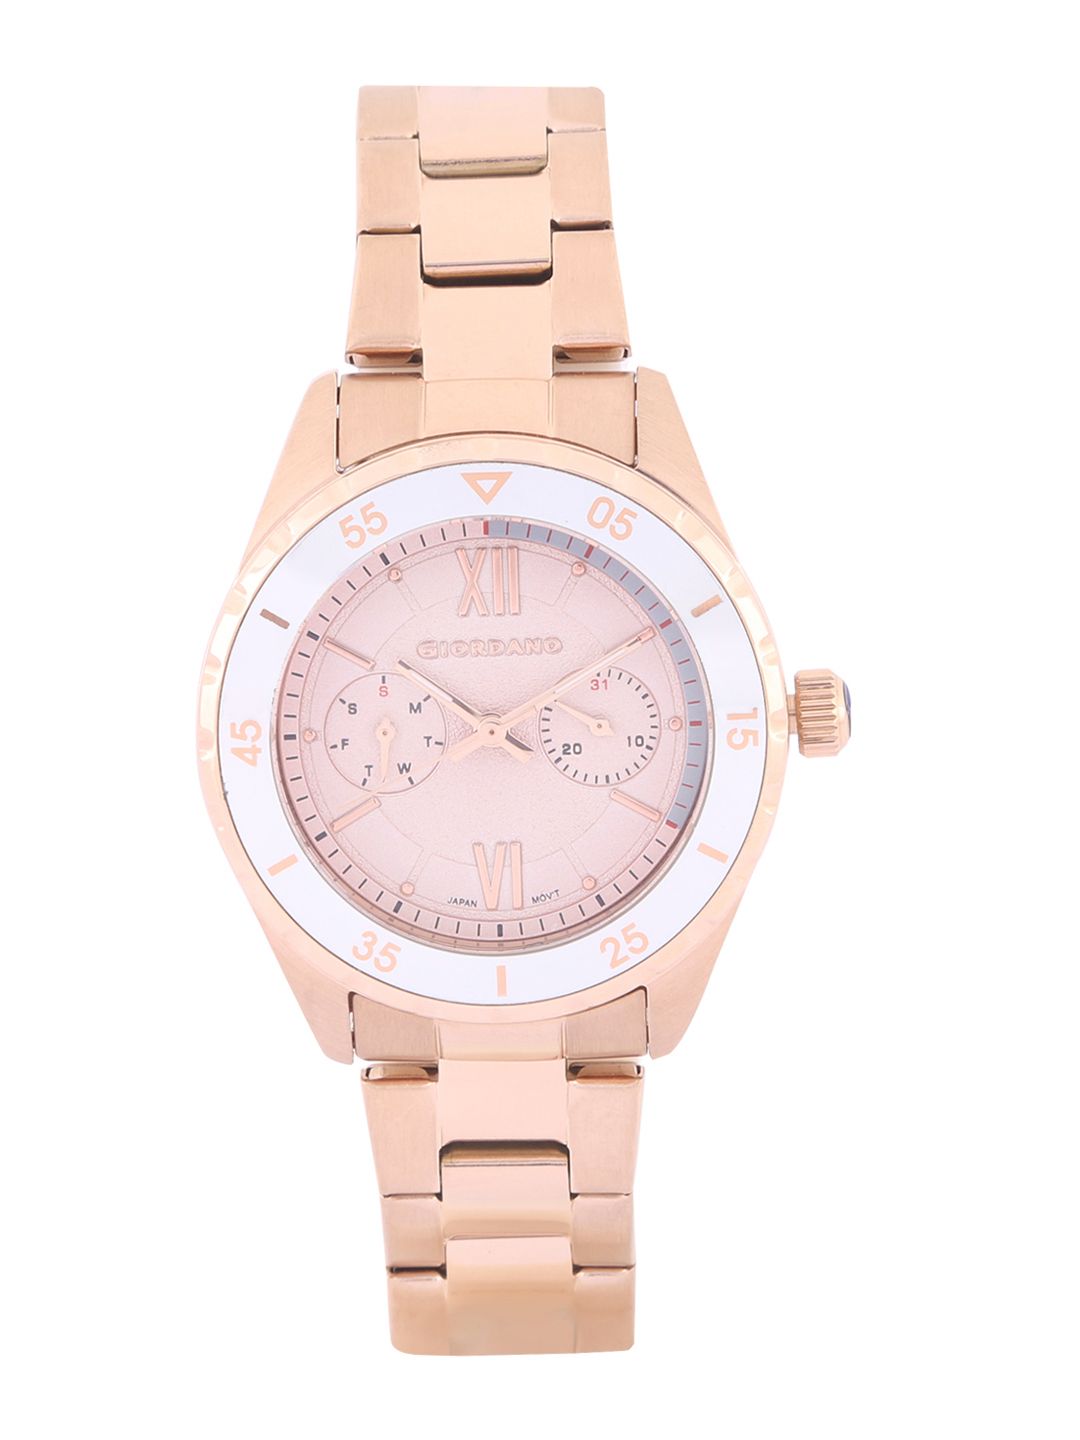 GIORDANO Women Pink Analogue Watch 2964-33 Price in India